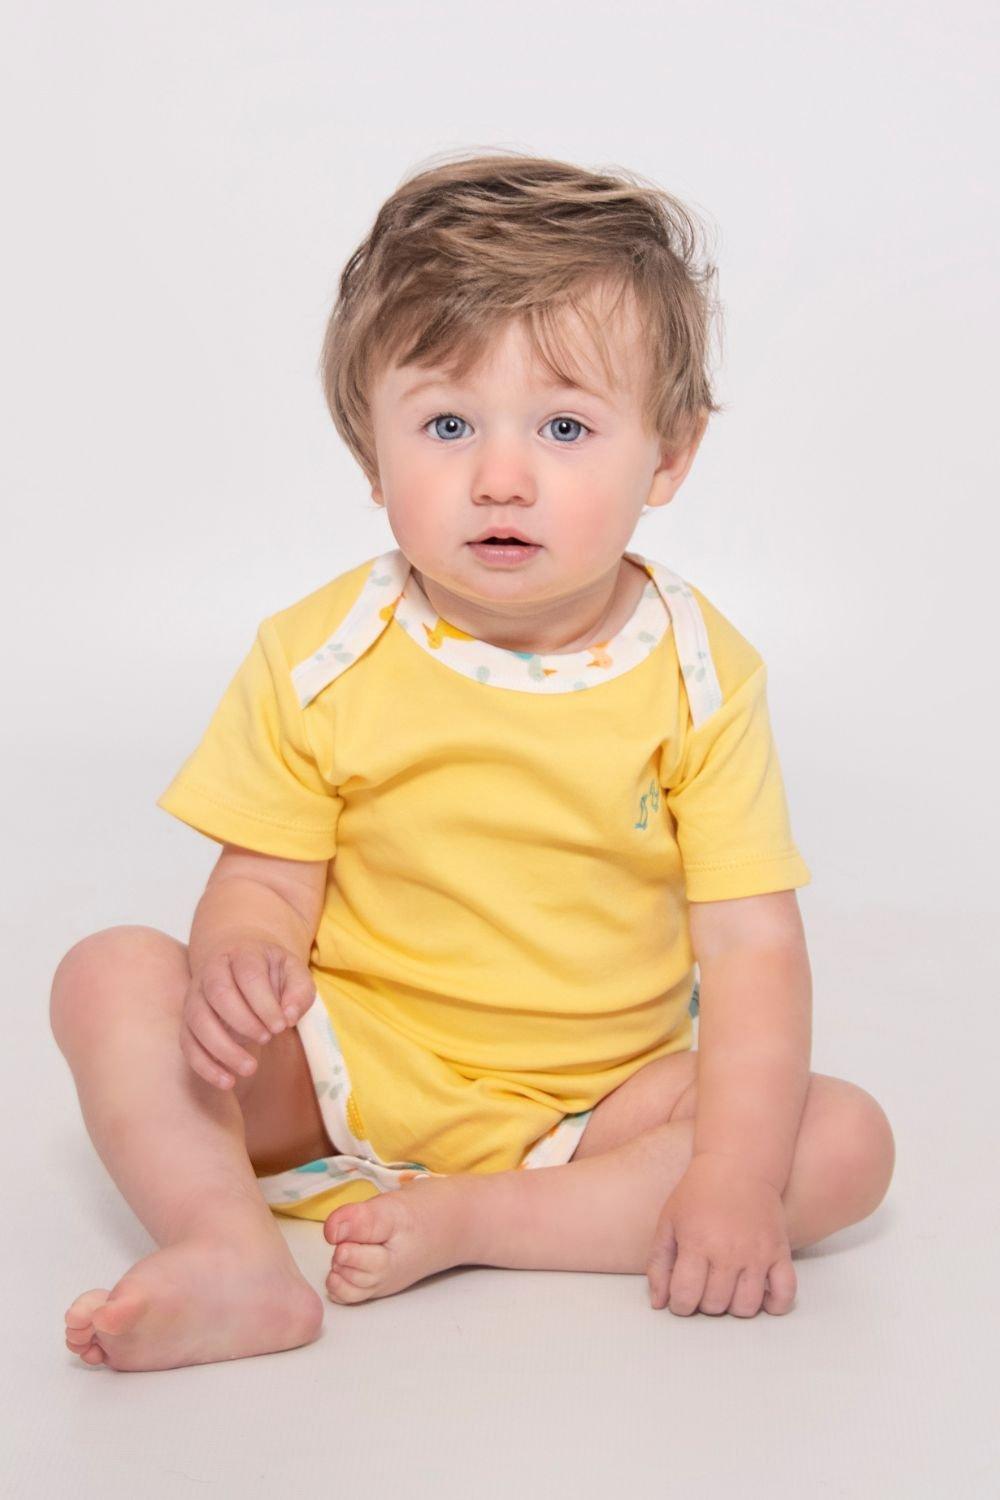 Little Ducks Pack of 2 Baby Vests in Organic Cotton